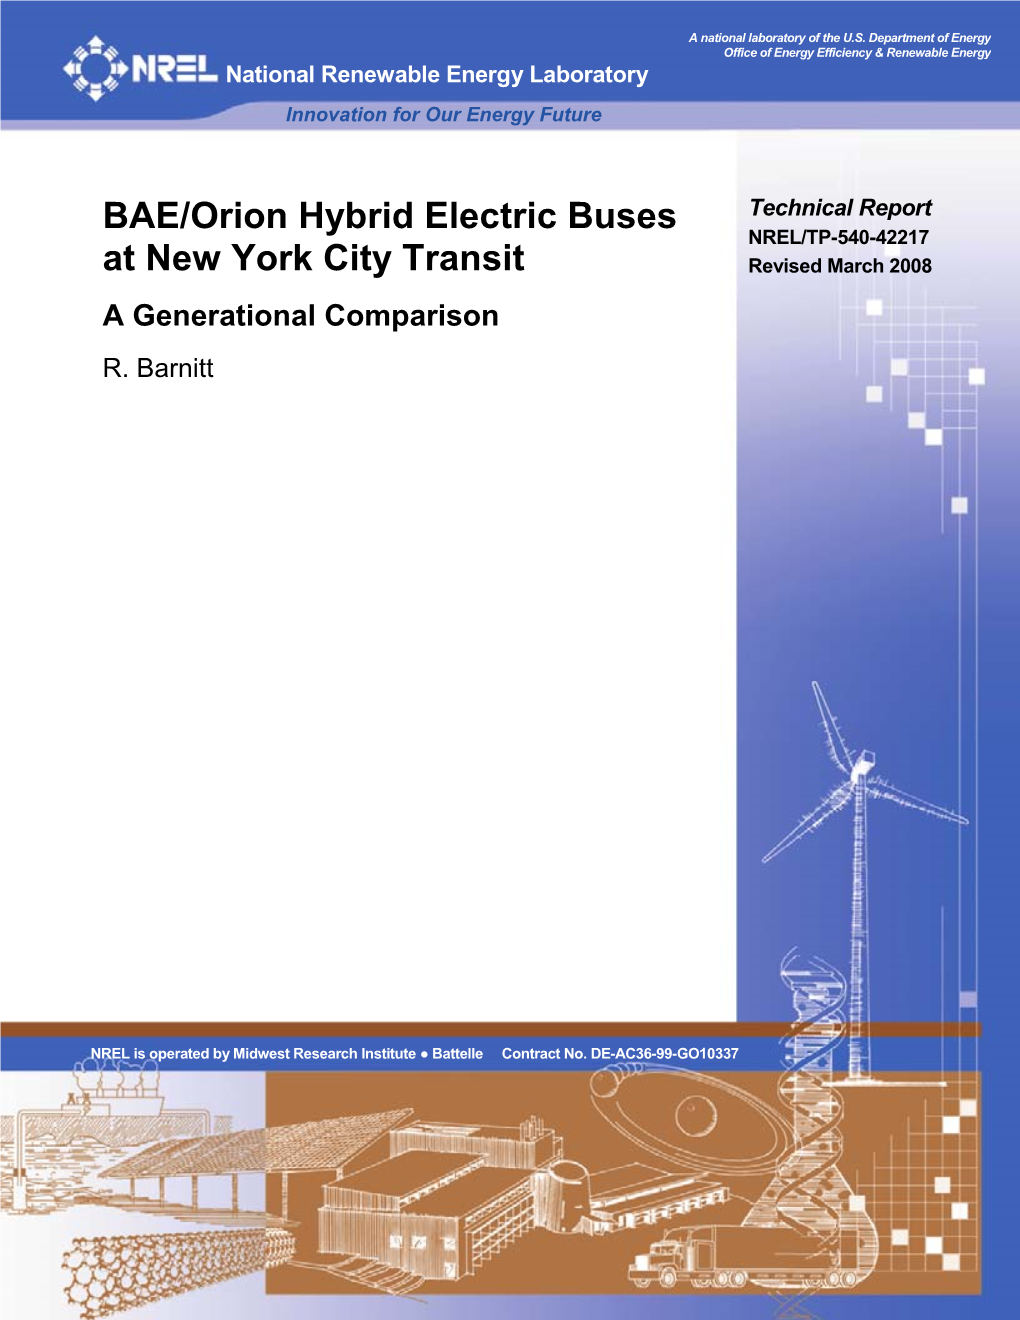 BAE/Orion Hybrid Electric Buses at New York City Transit: a Generational Comparison